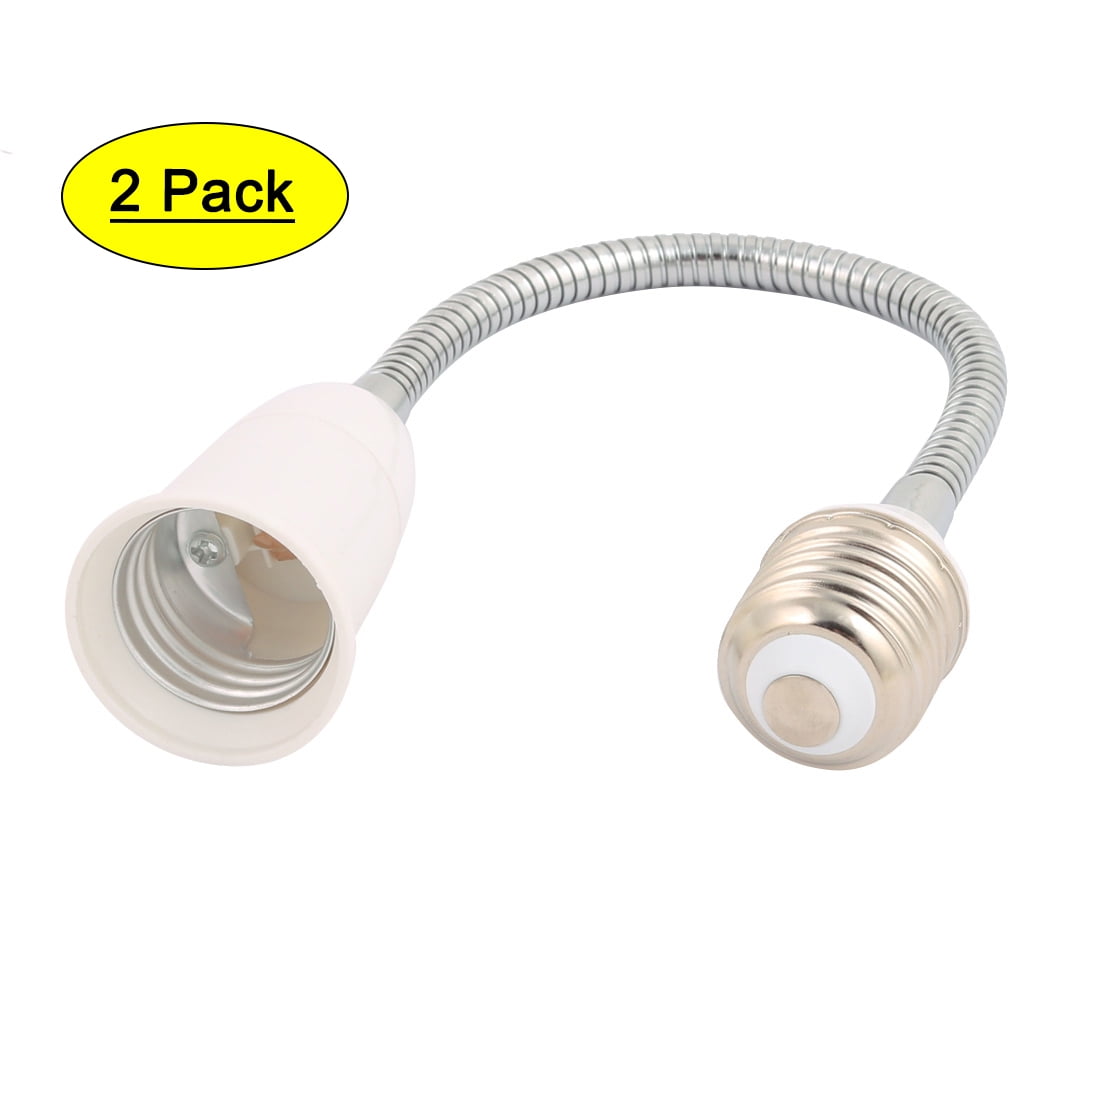 Flexible Adapter to Focus Lighting 11" LIGHT BULB ELECTRIC AC SOCKET EXTENSION